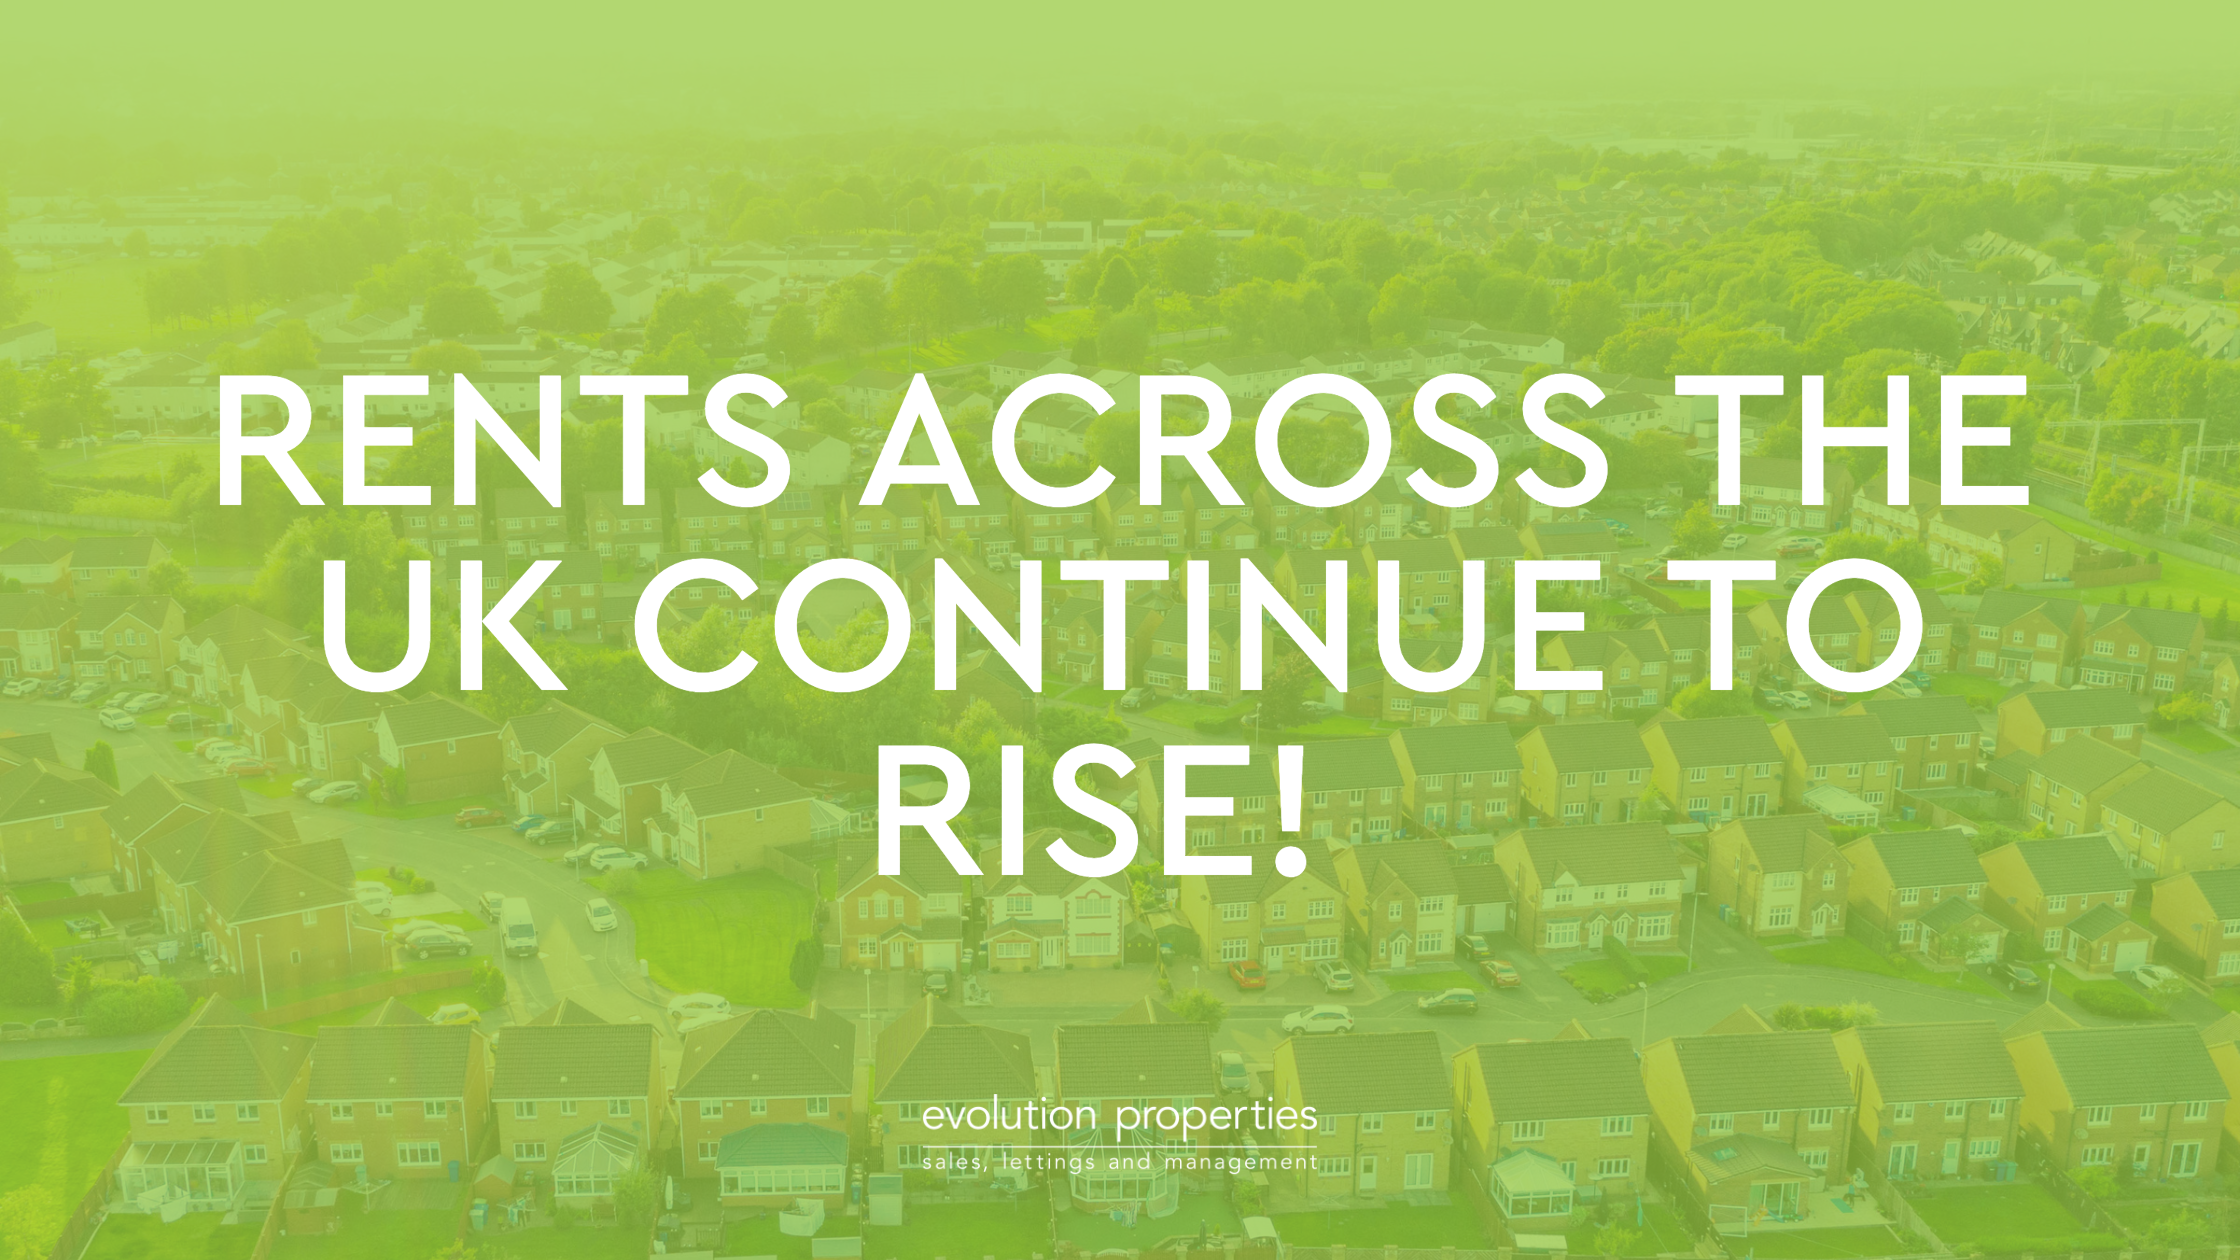 Rents across the UK continue to rise!